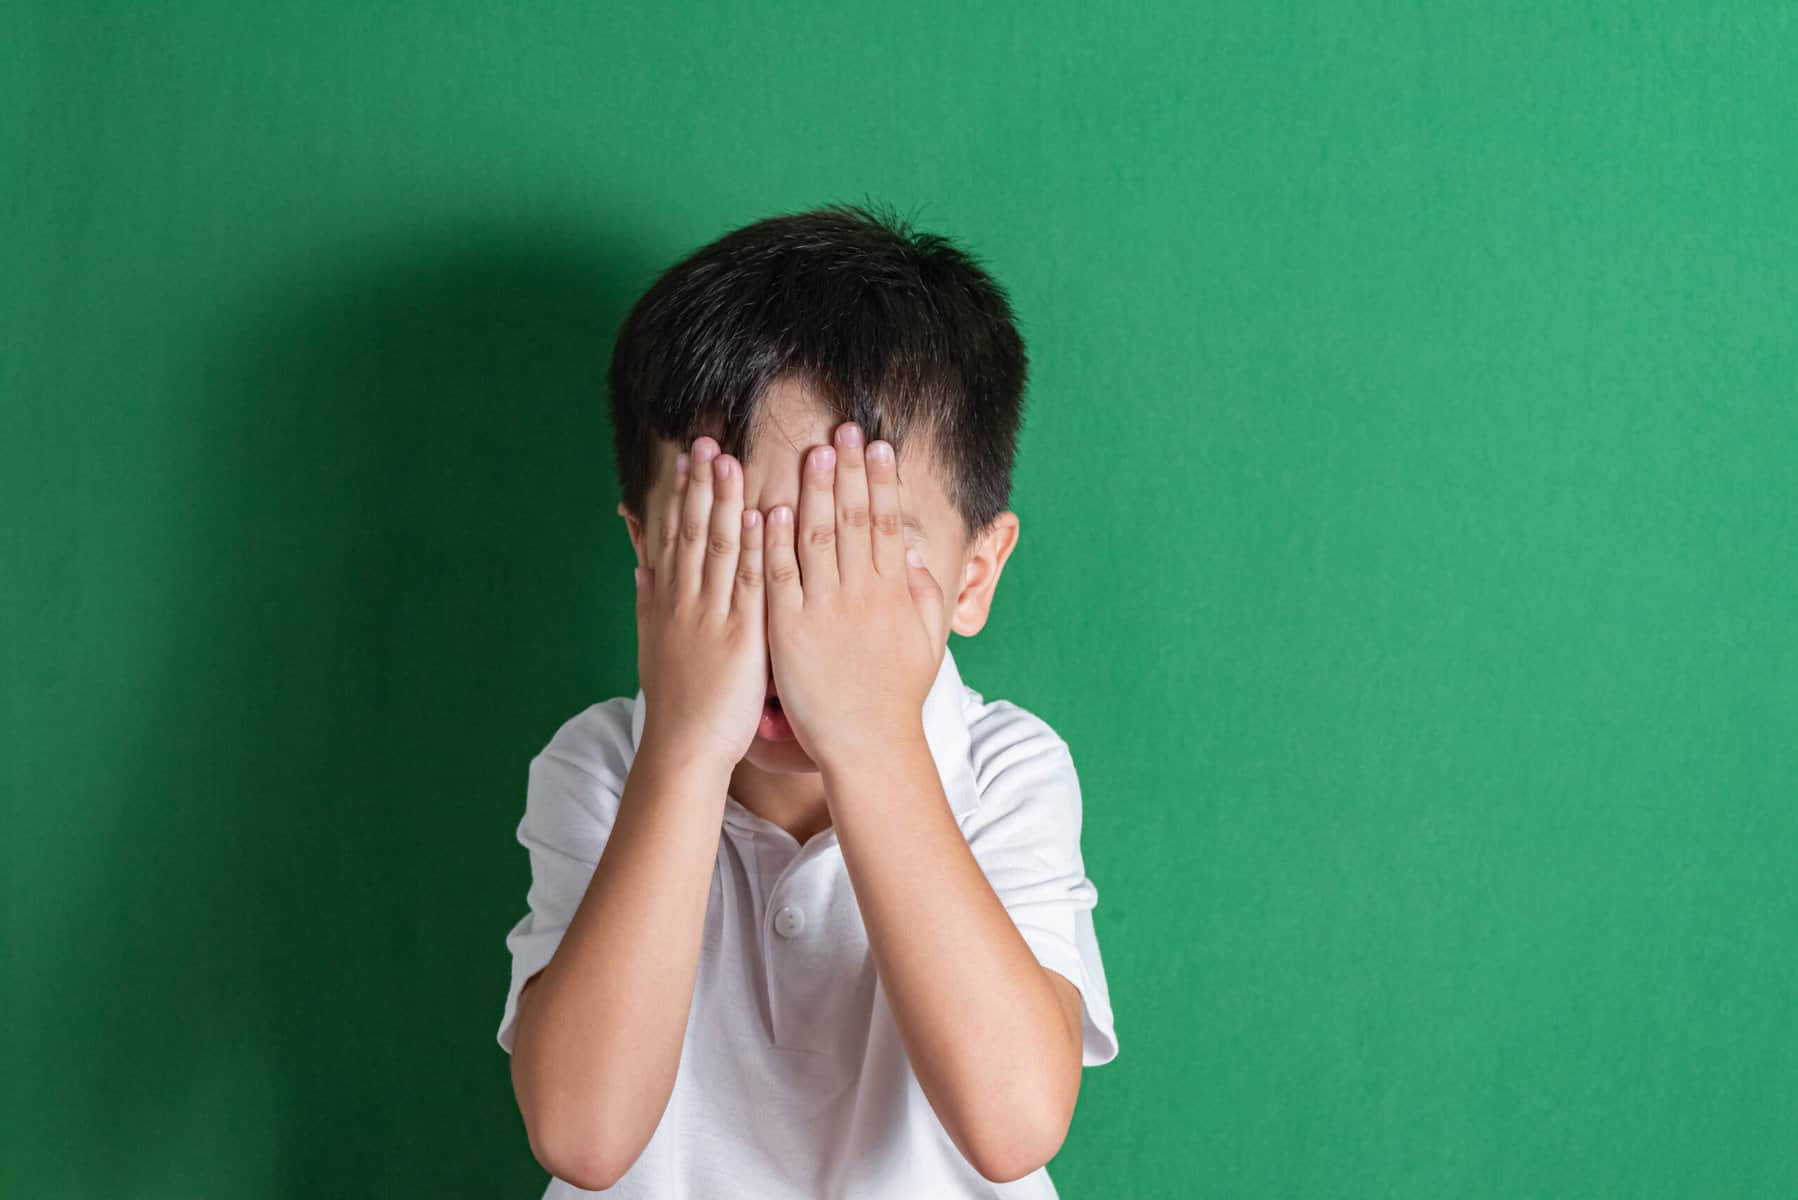 A child is shown in a white polo shirt in front of a vibrant green wall with his hands totally covering his face.